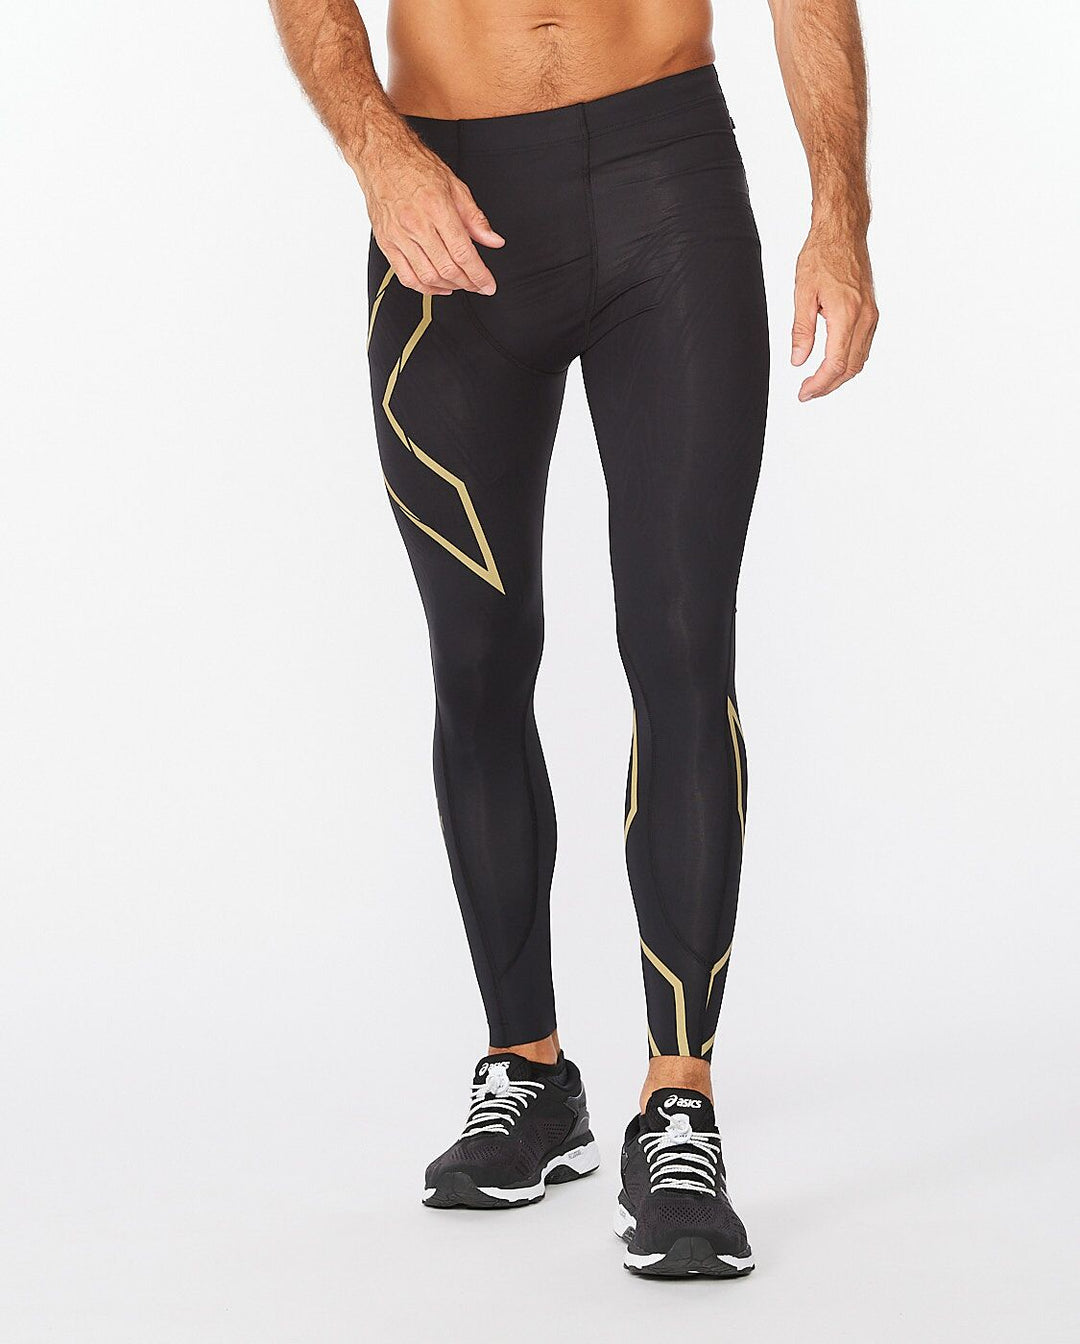 2XU Light Speed Compression Men's Cycling  Tights (Black/Gold Reflective)